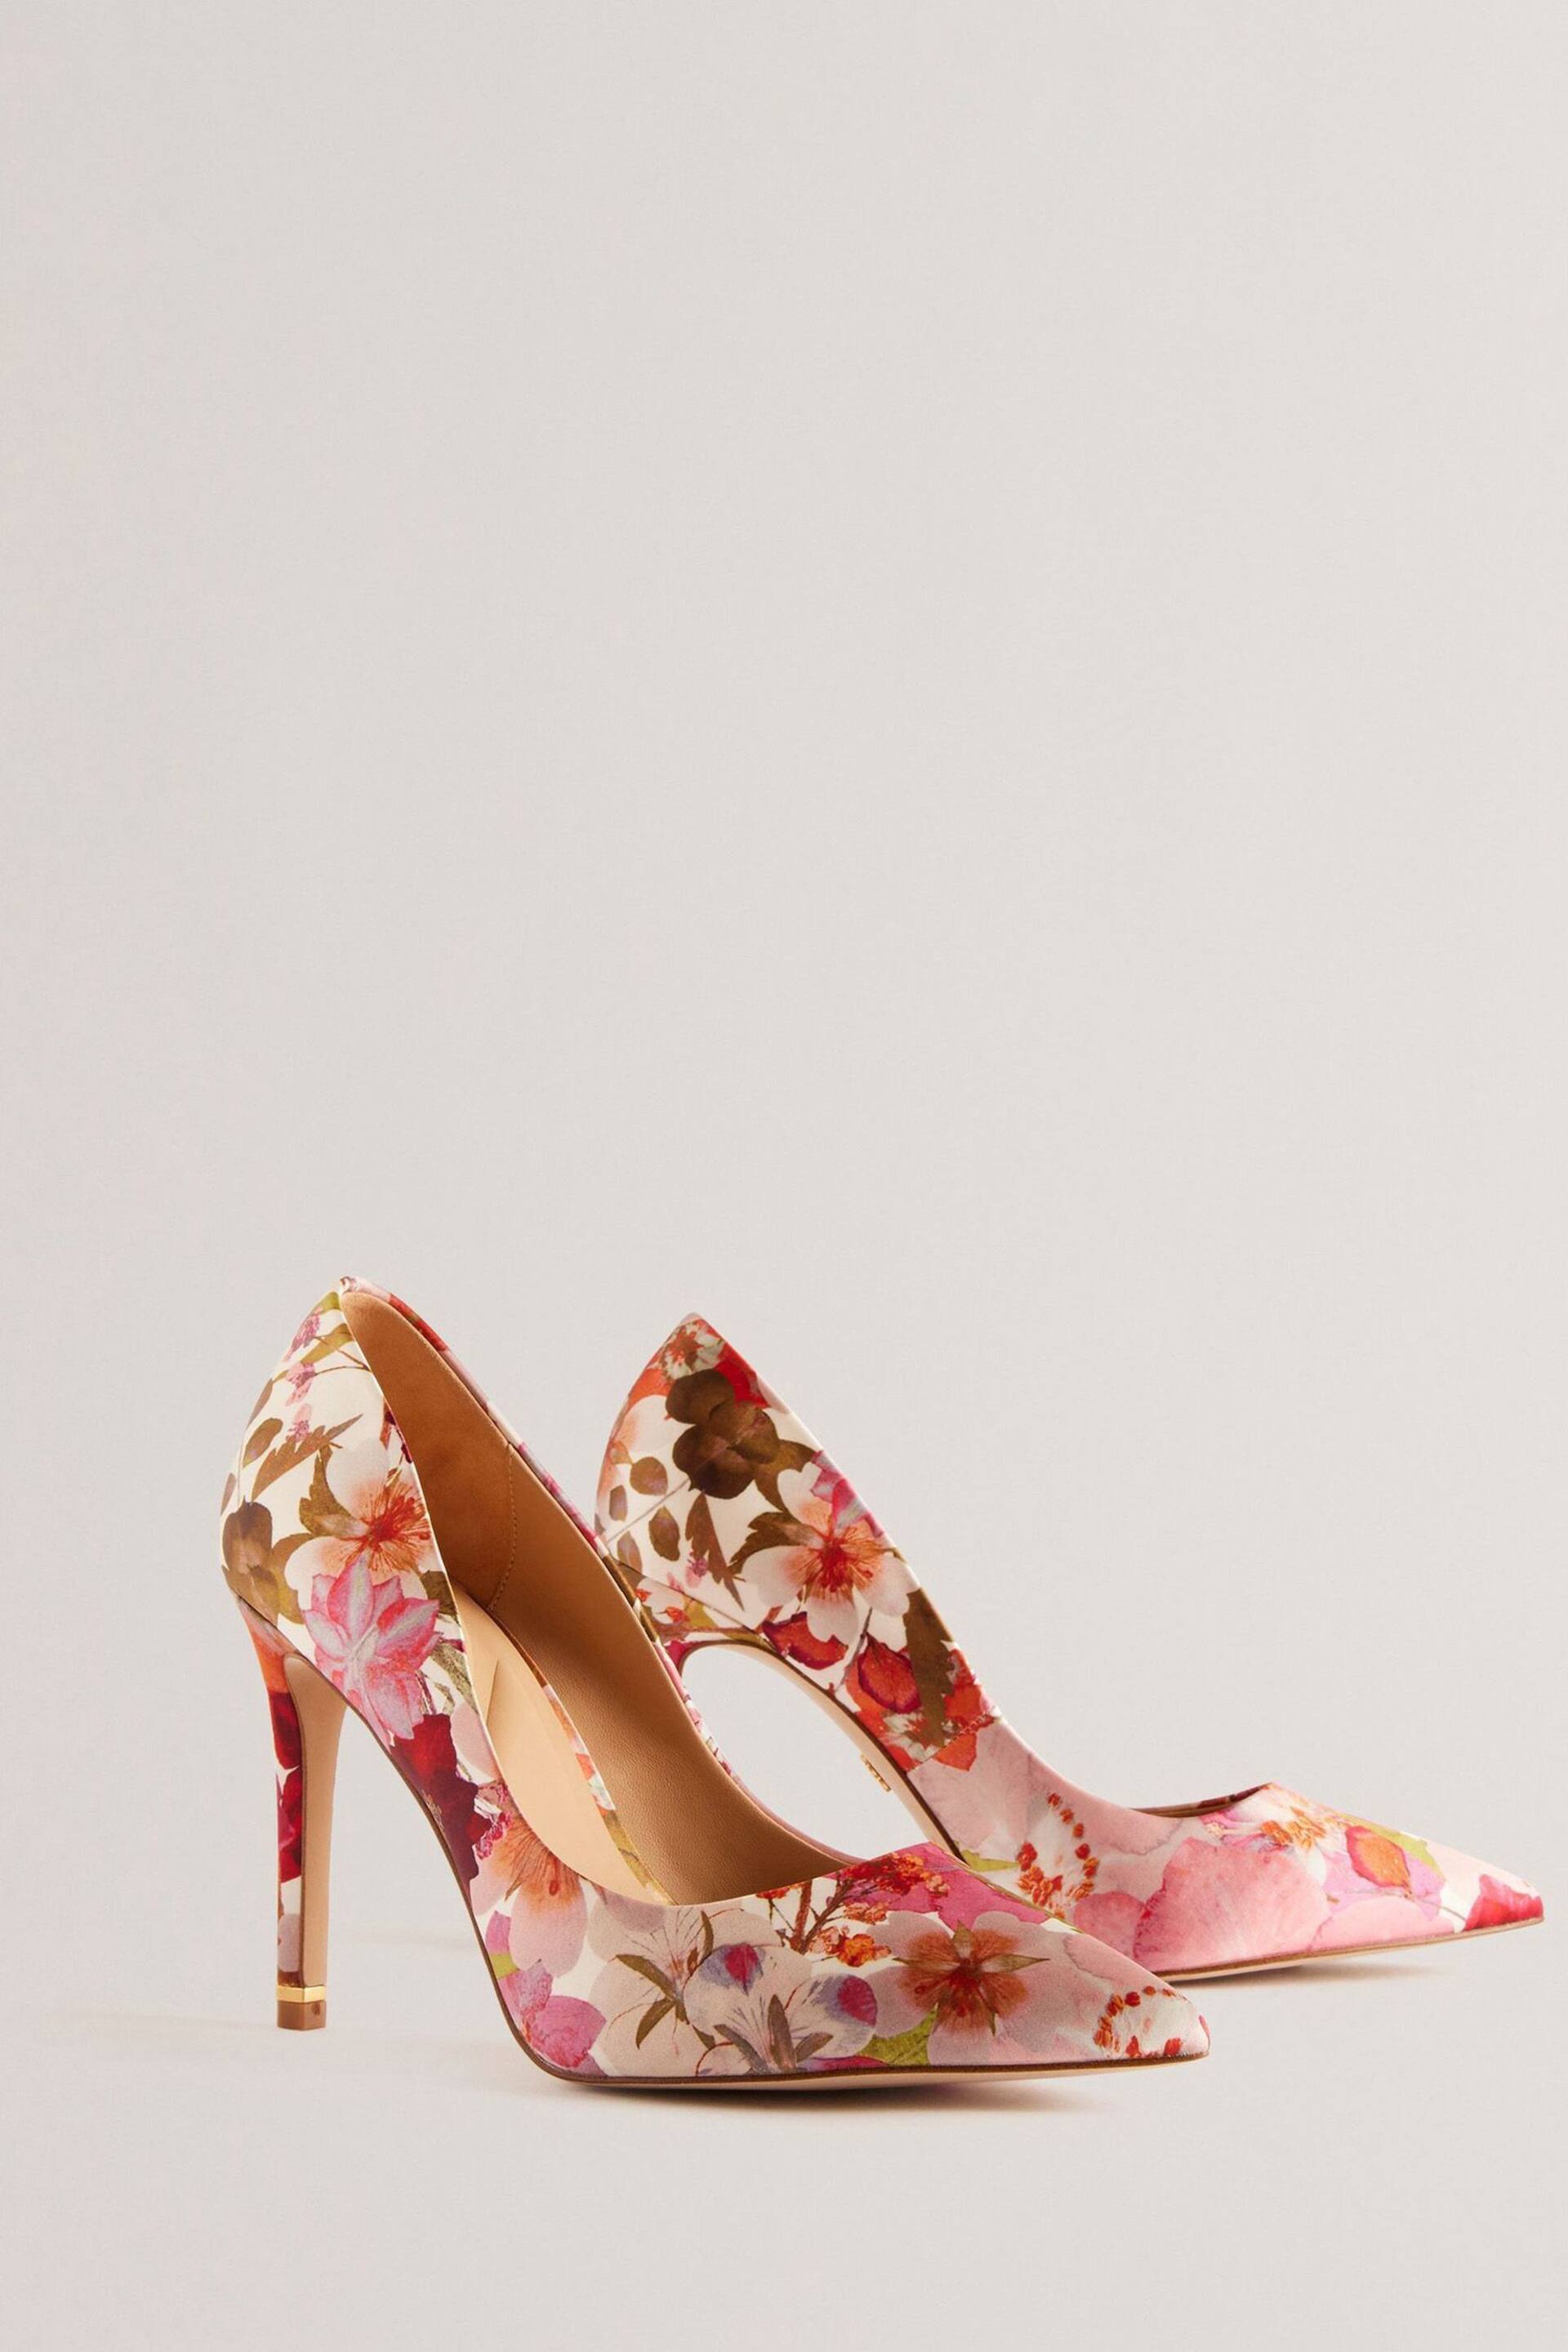 Ted Baker Cream Floral High Heeled Caaraa Pumps With River Of Gold Heel - Image 2 of 5